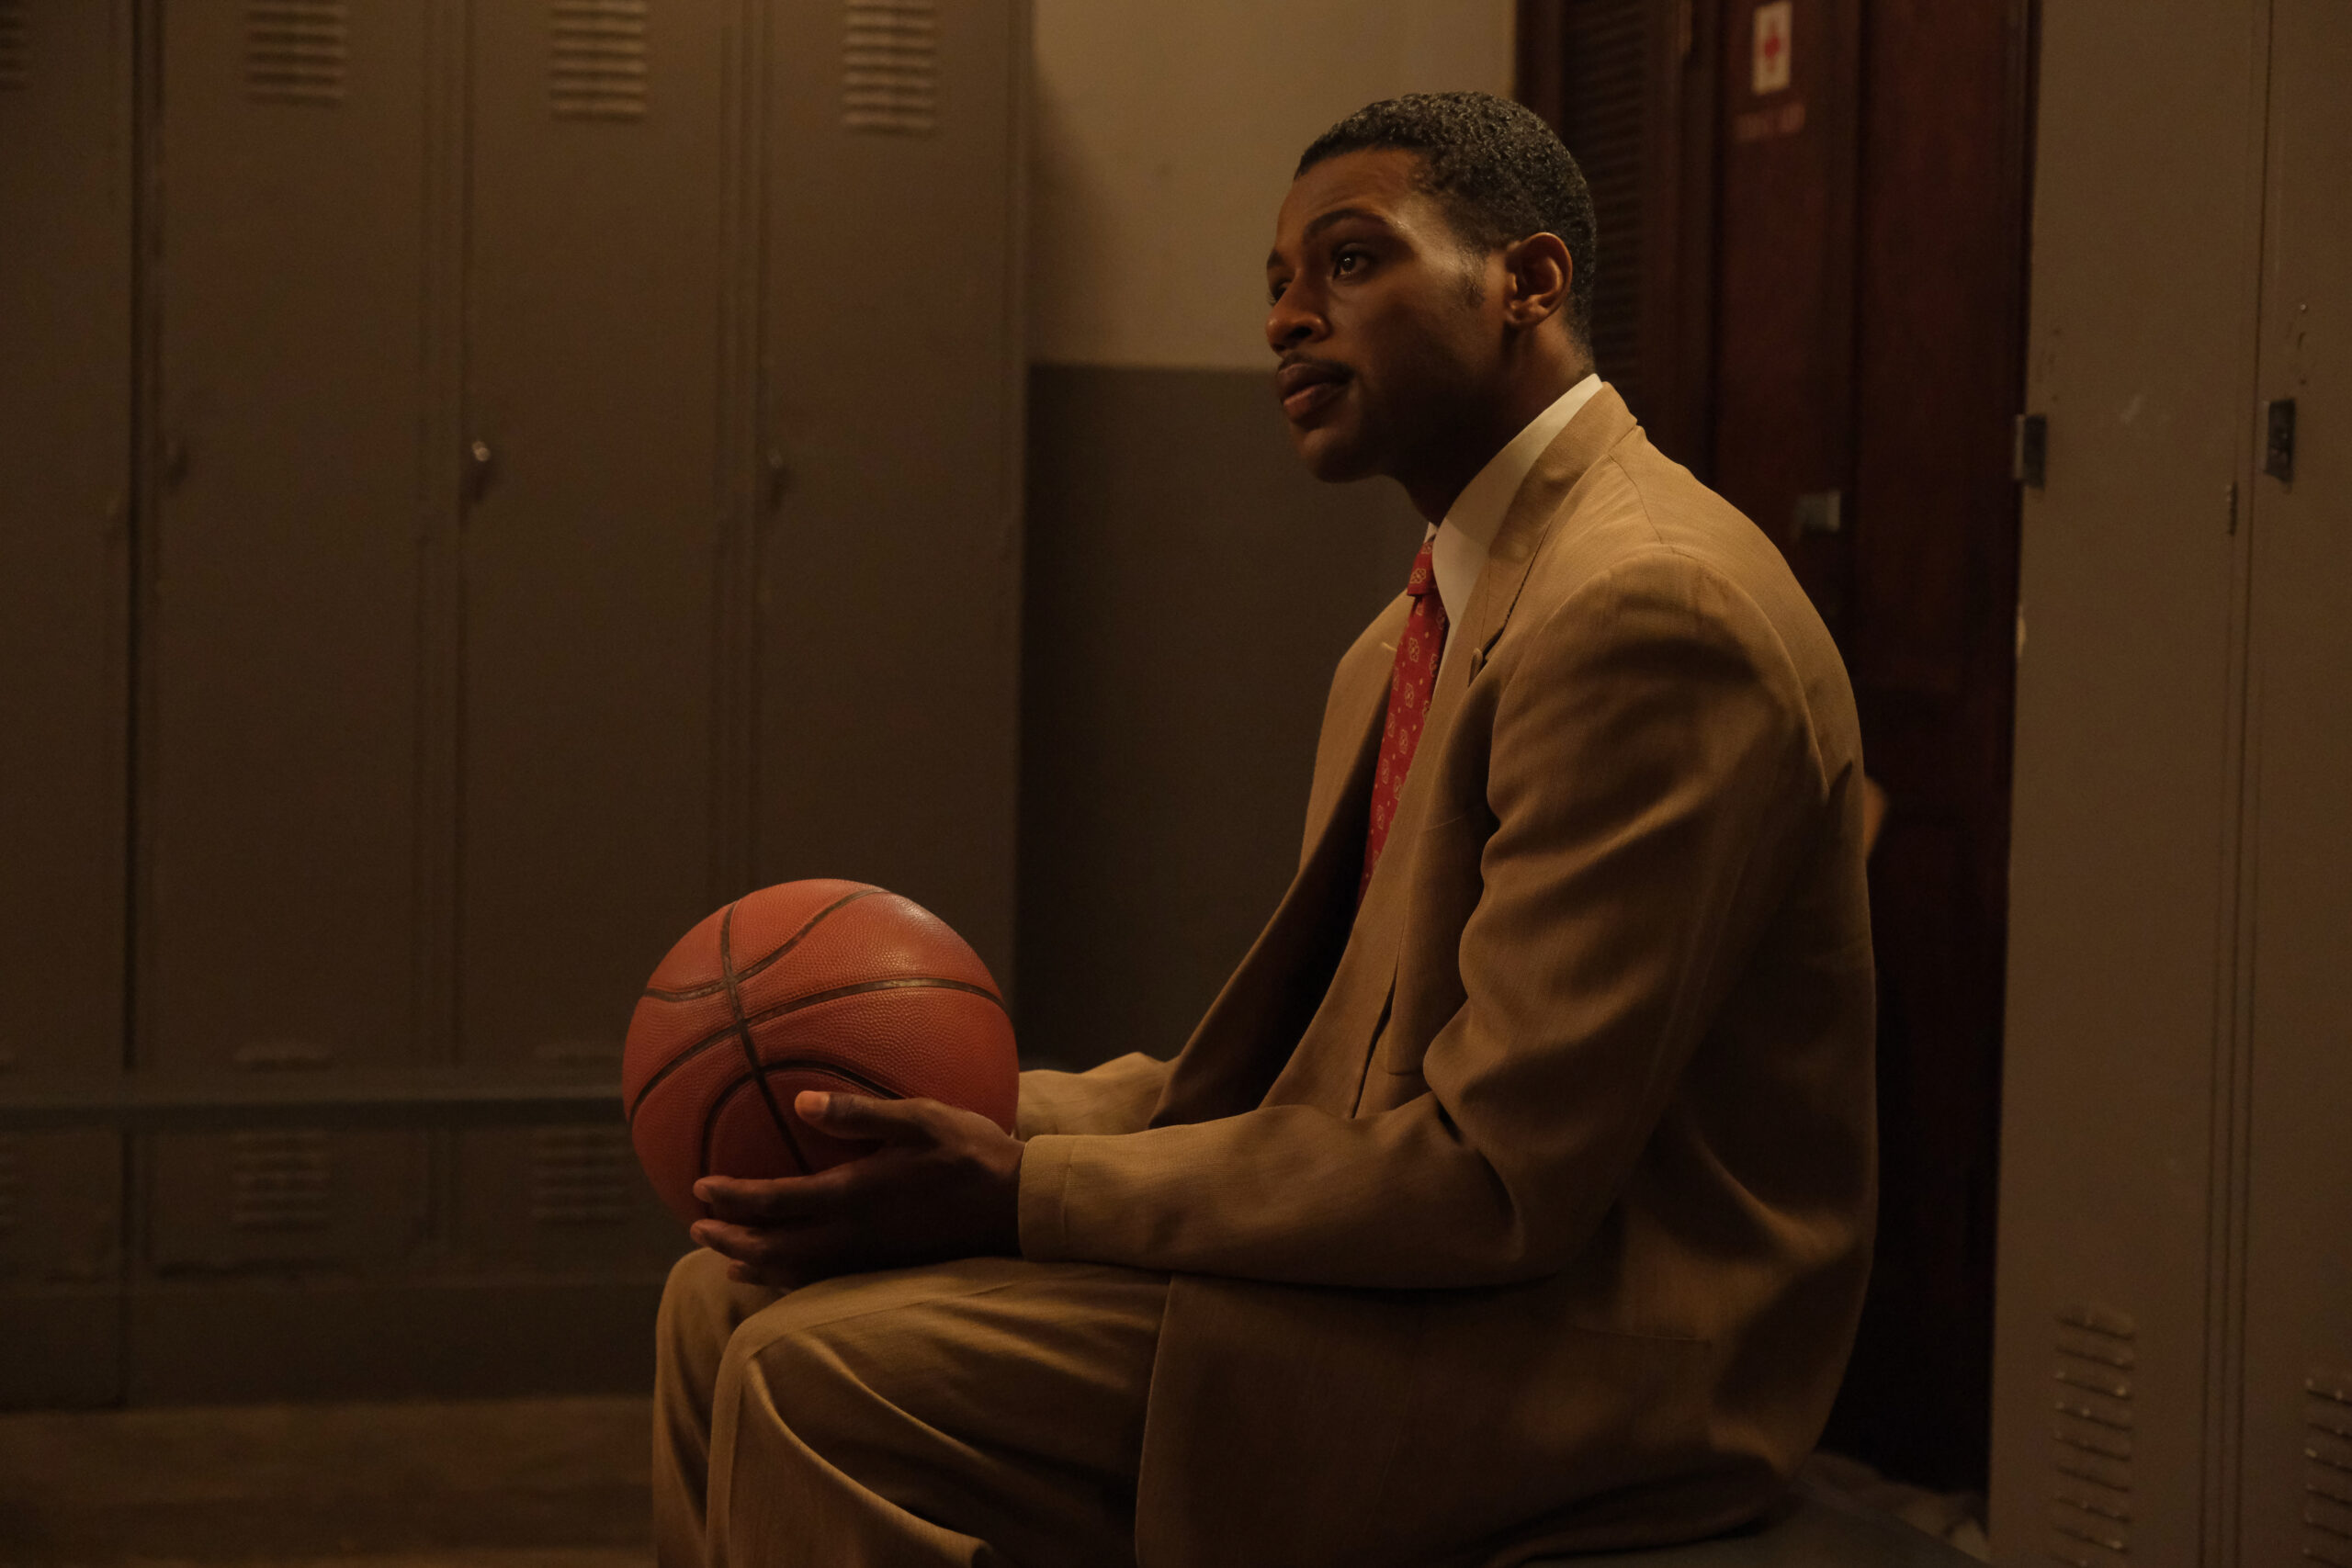 Everett Osborne went through a traumatic breakup with basketball before coming back to it for ‘Sweetwater’